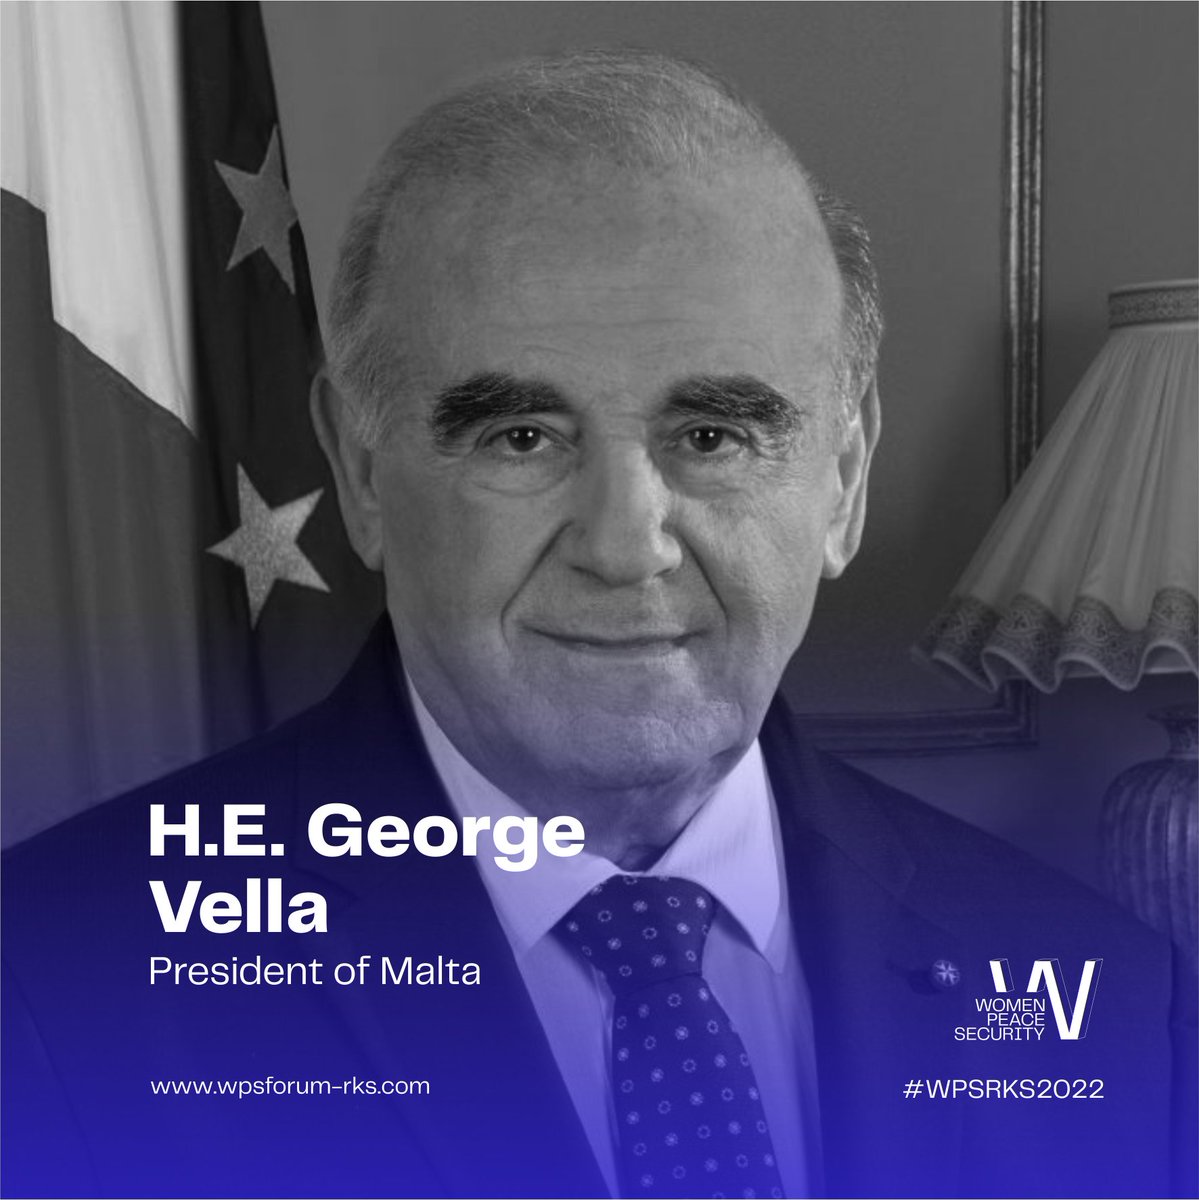 We are delighted to welcome to Kosovo, the President of Malta, H.E. George Vella. 🇽🇰🇲🇹 @presidentmt Vella will join the inaugural edition of the Women, Peace and Security Forum, an initiative of President @VjosaOsmaniPRKS! #WPSRKS2022 ⏰ 22-23 October 👉 wpsforum-rks.com